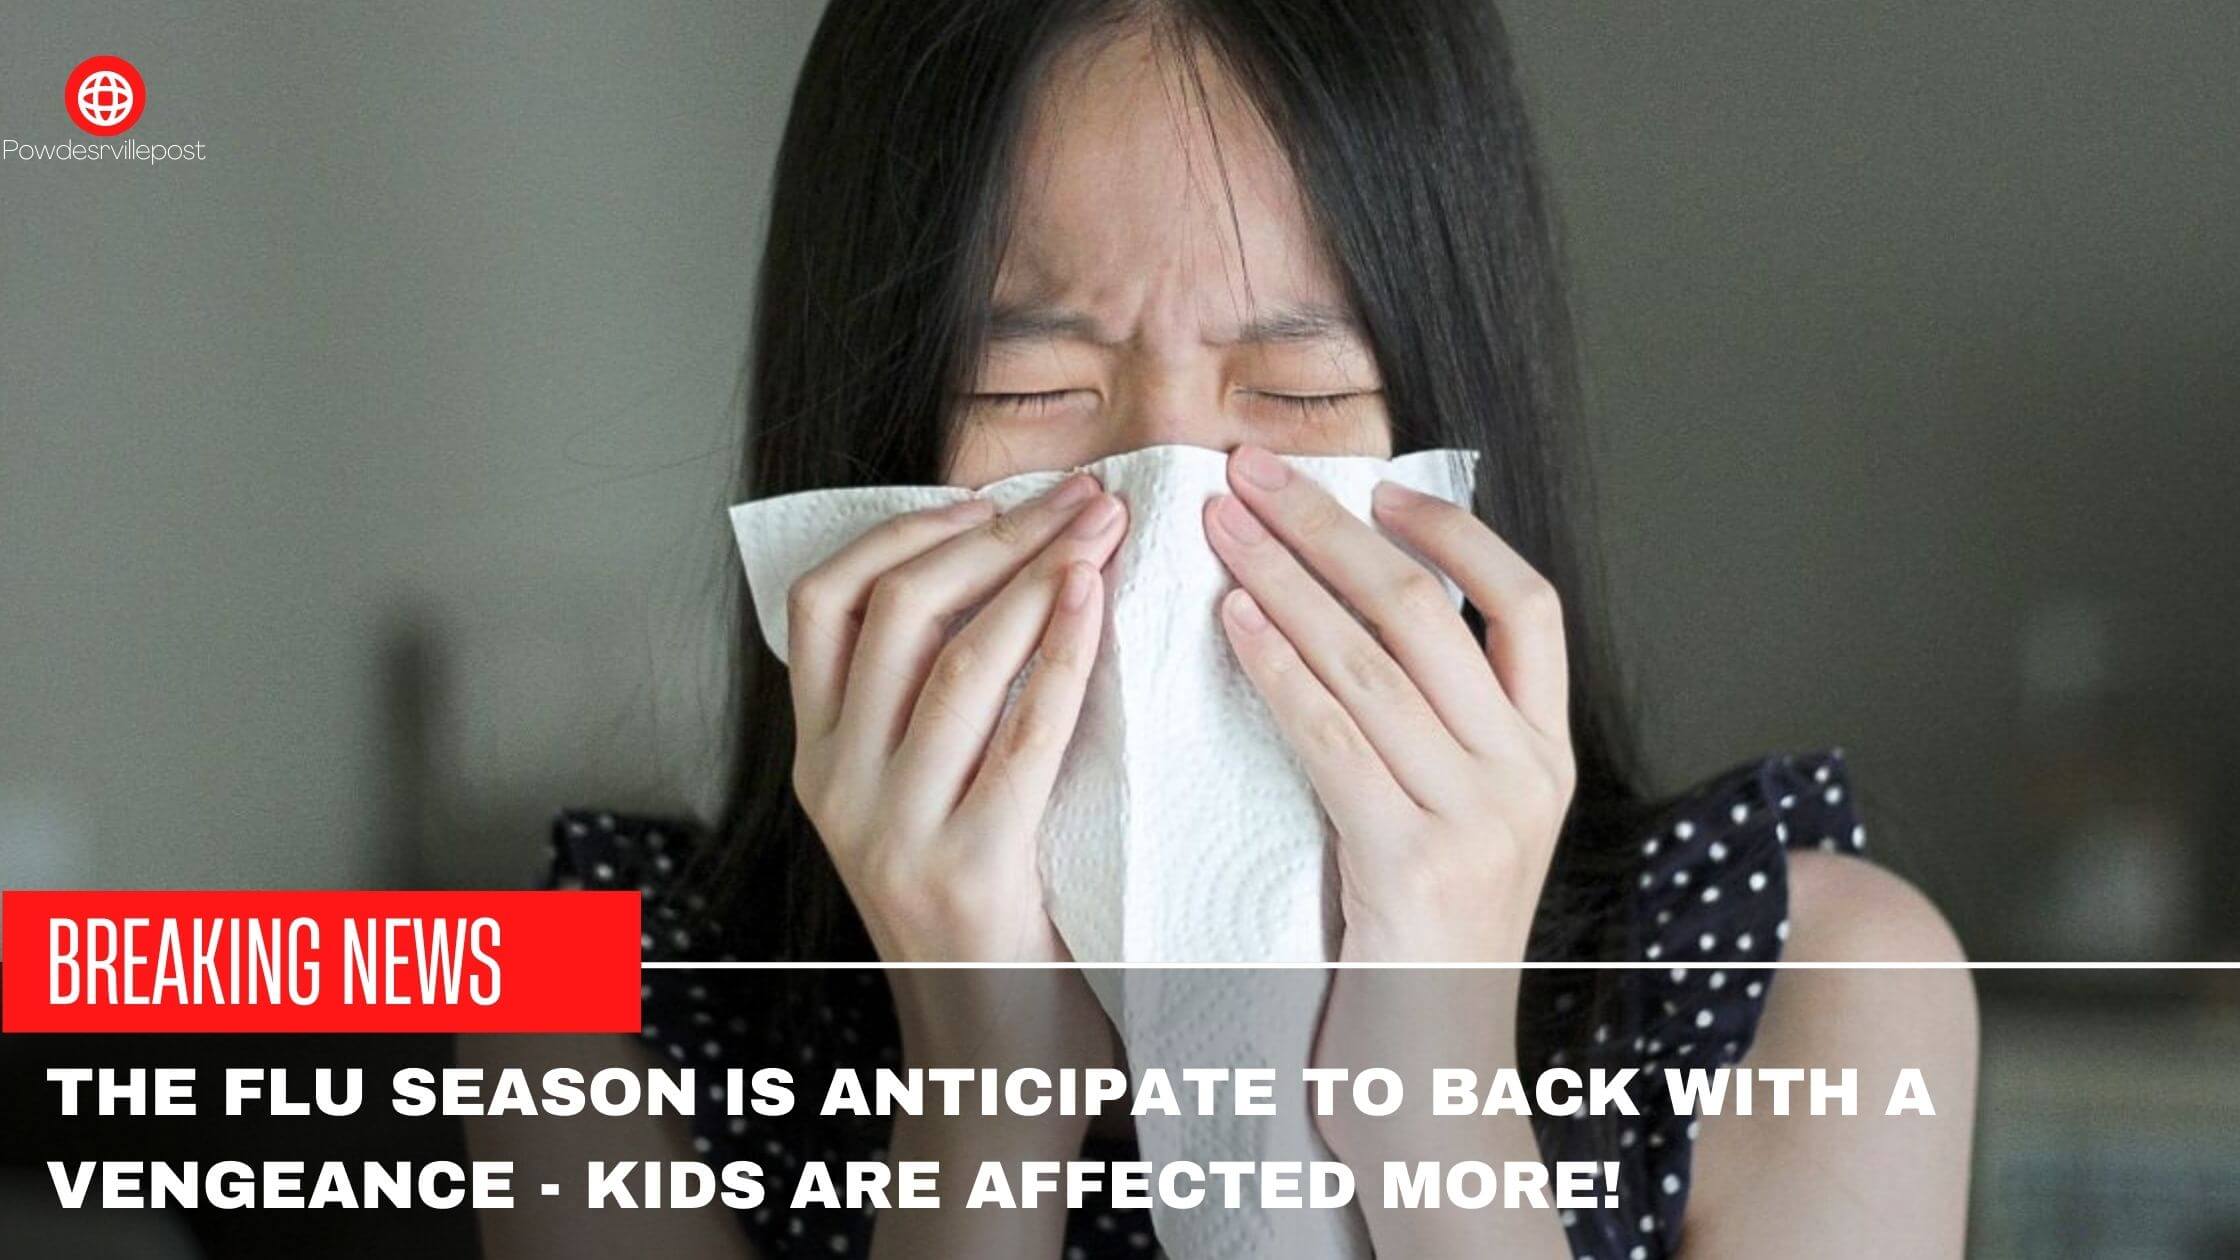 The Flu Season Is Anticipate To Back With A Vengeance - Kids Are Affected more!